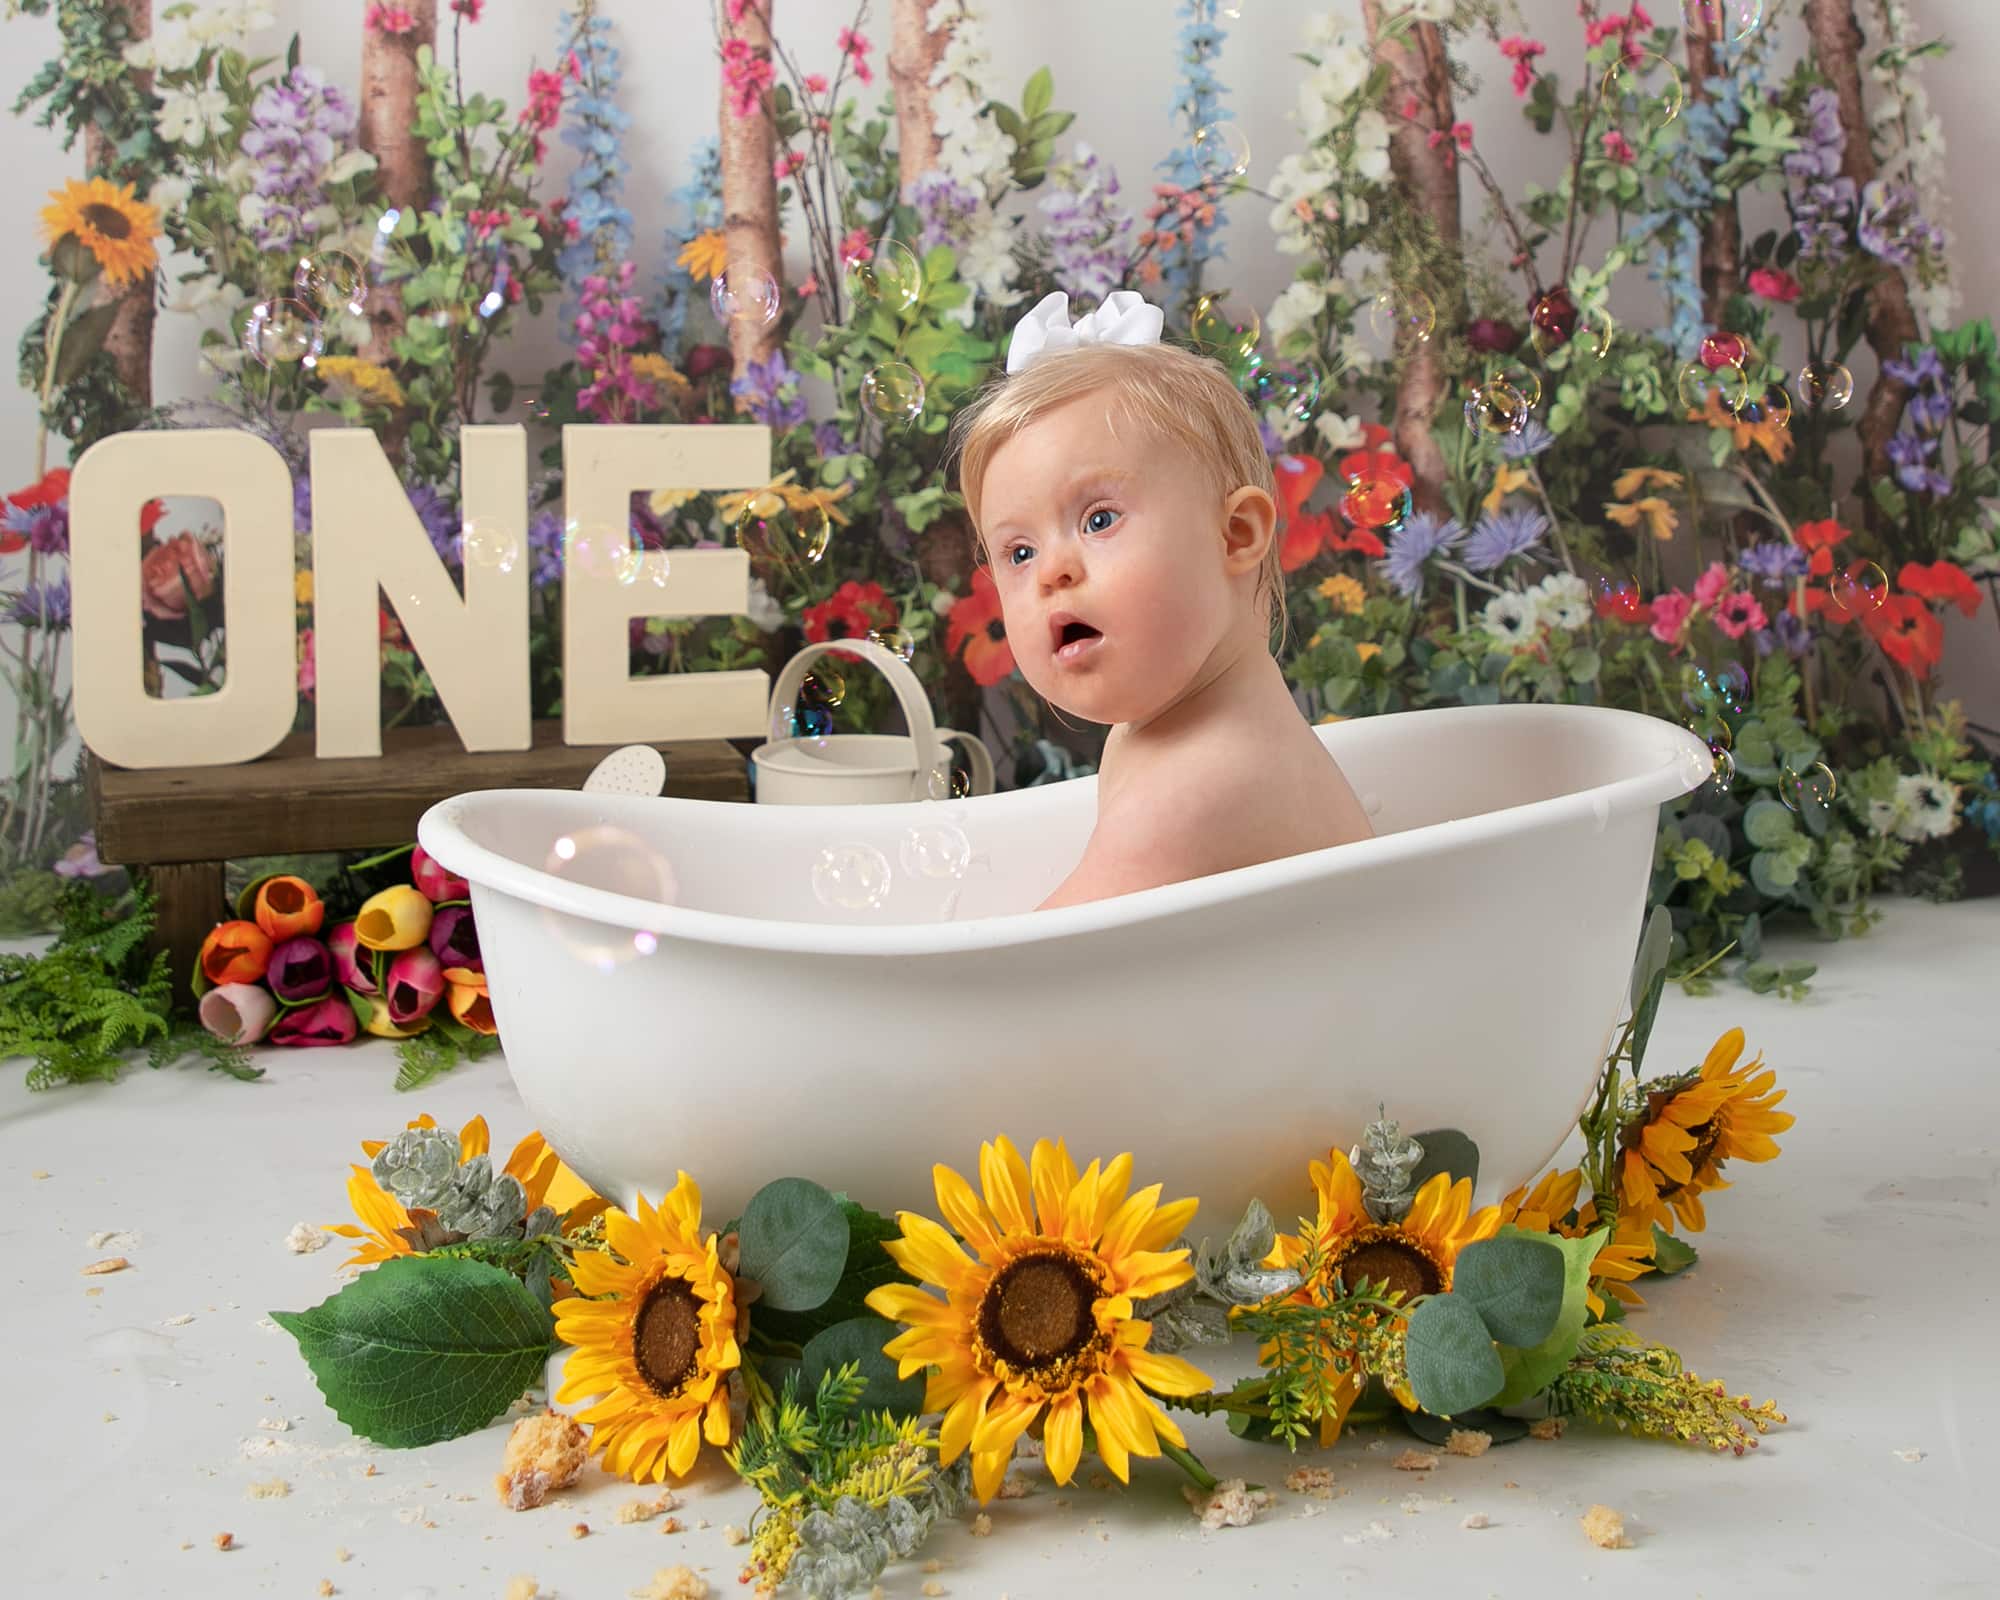 Baby girl sat in mini white bathtub, surrounded by sunflowers. using a meadow style backdrop with lots of flowers